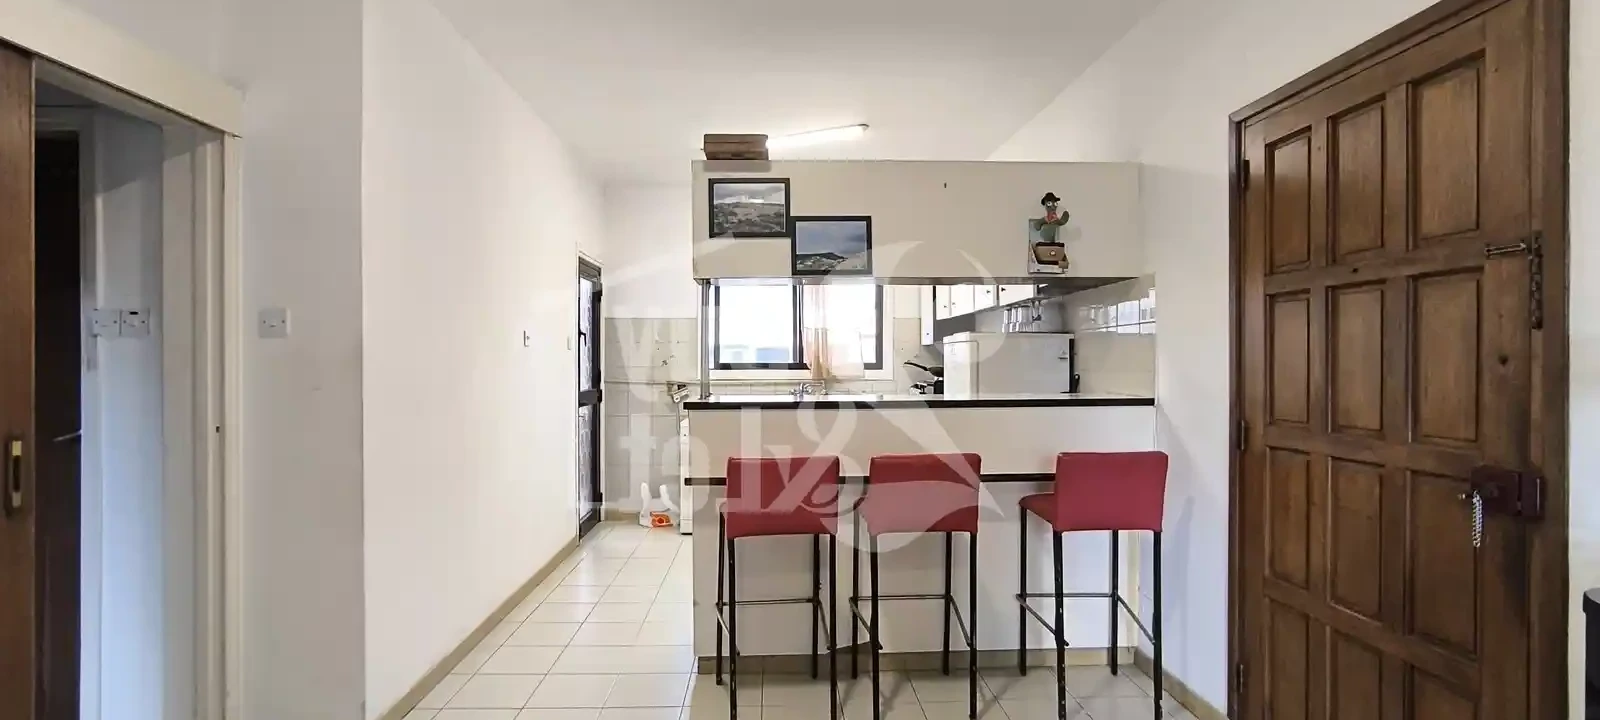 2-bedroom apartment fоr sаle €245.000, image 1